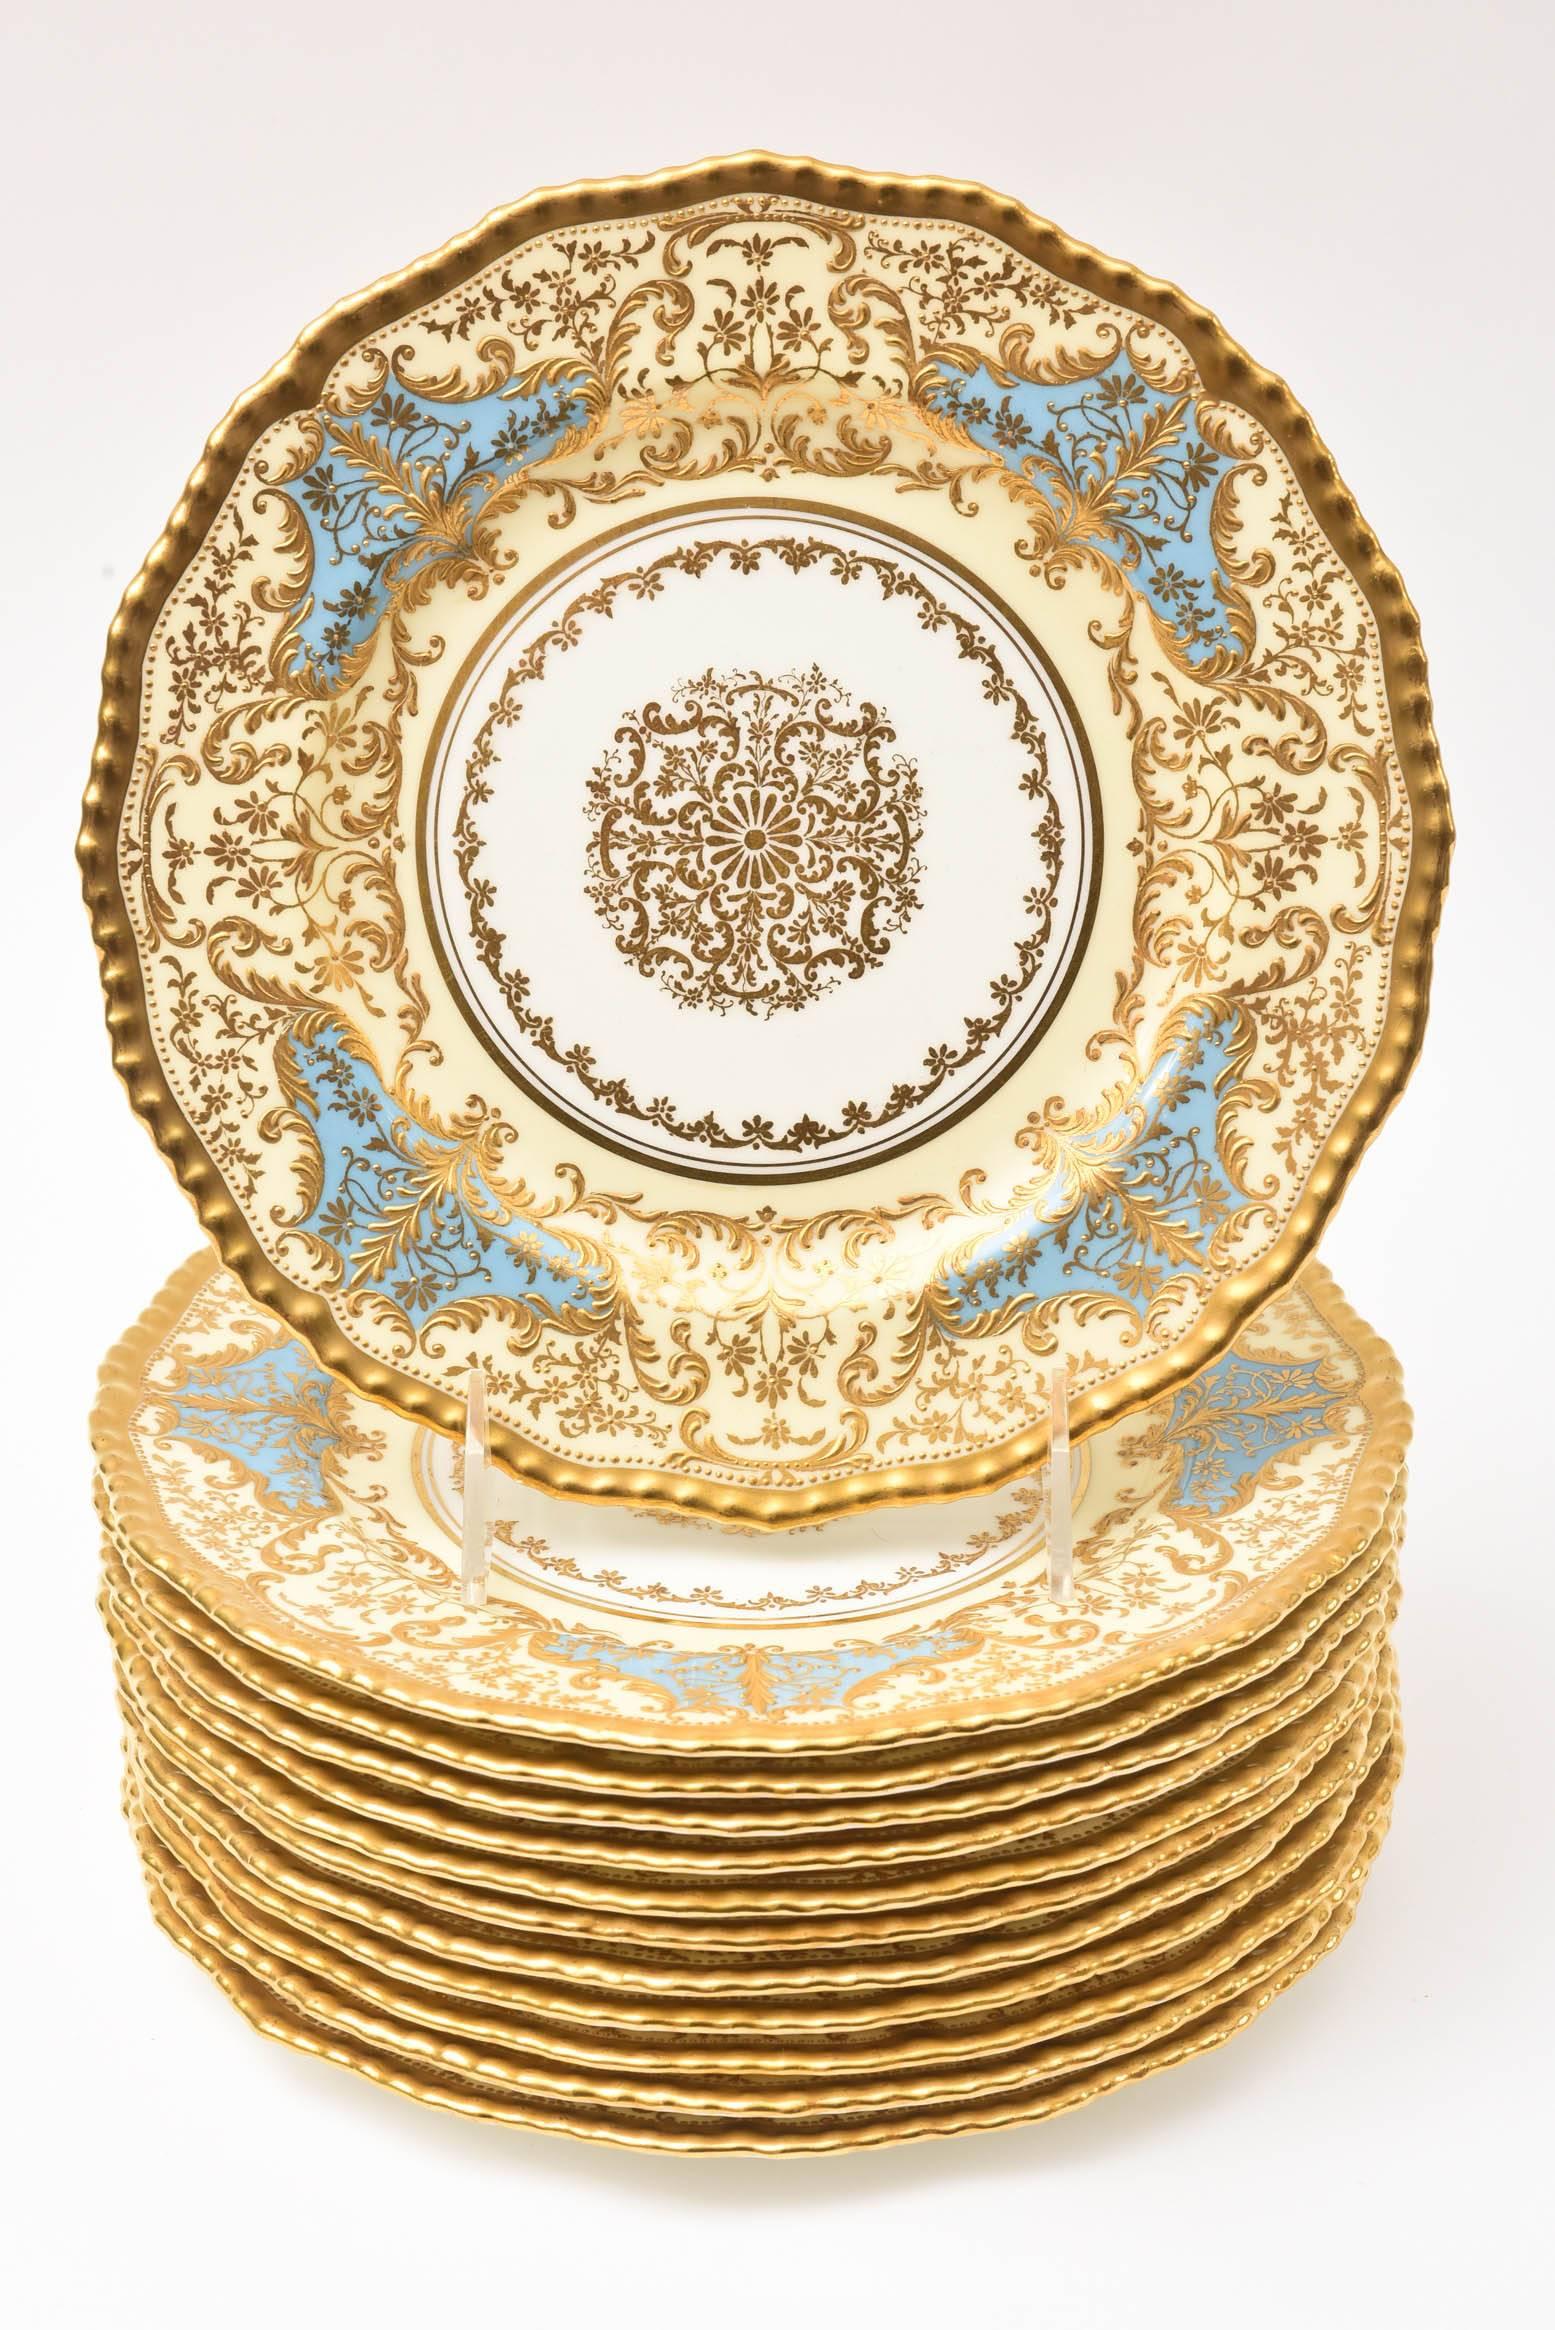 Hand-Crafted 12 Exquisite Turquoise Gilt Encrusted Dessert Plates, Antique English circa 1910